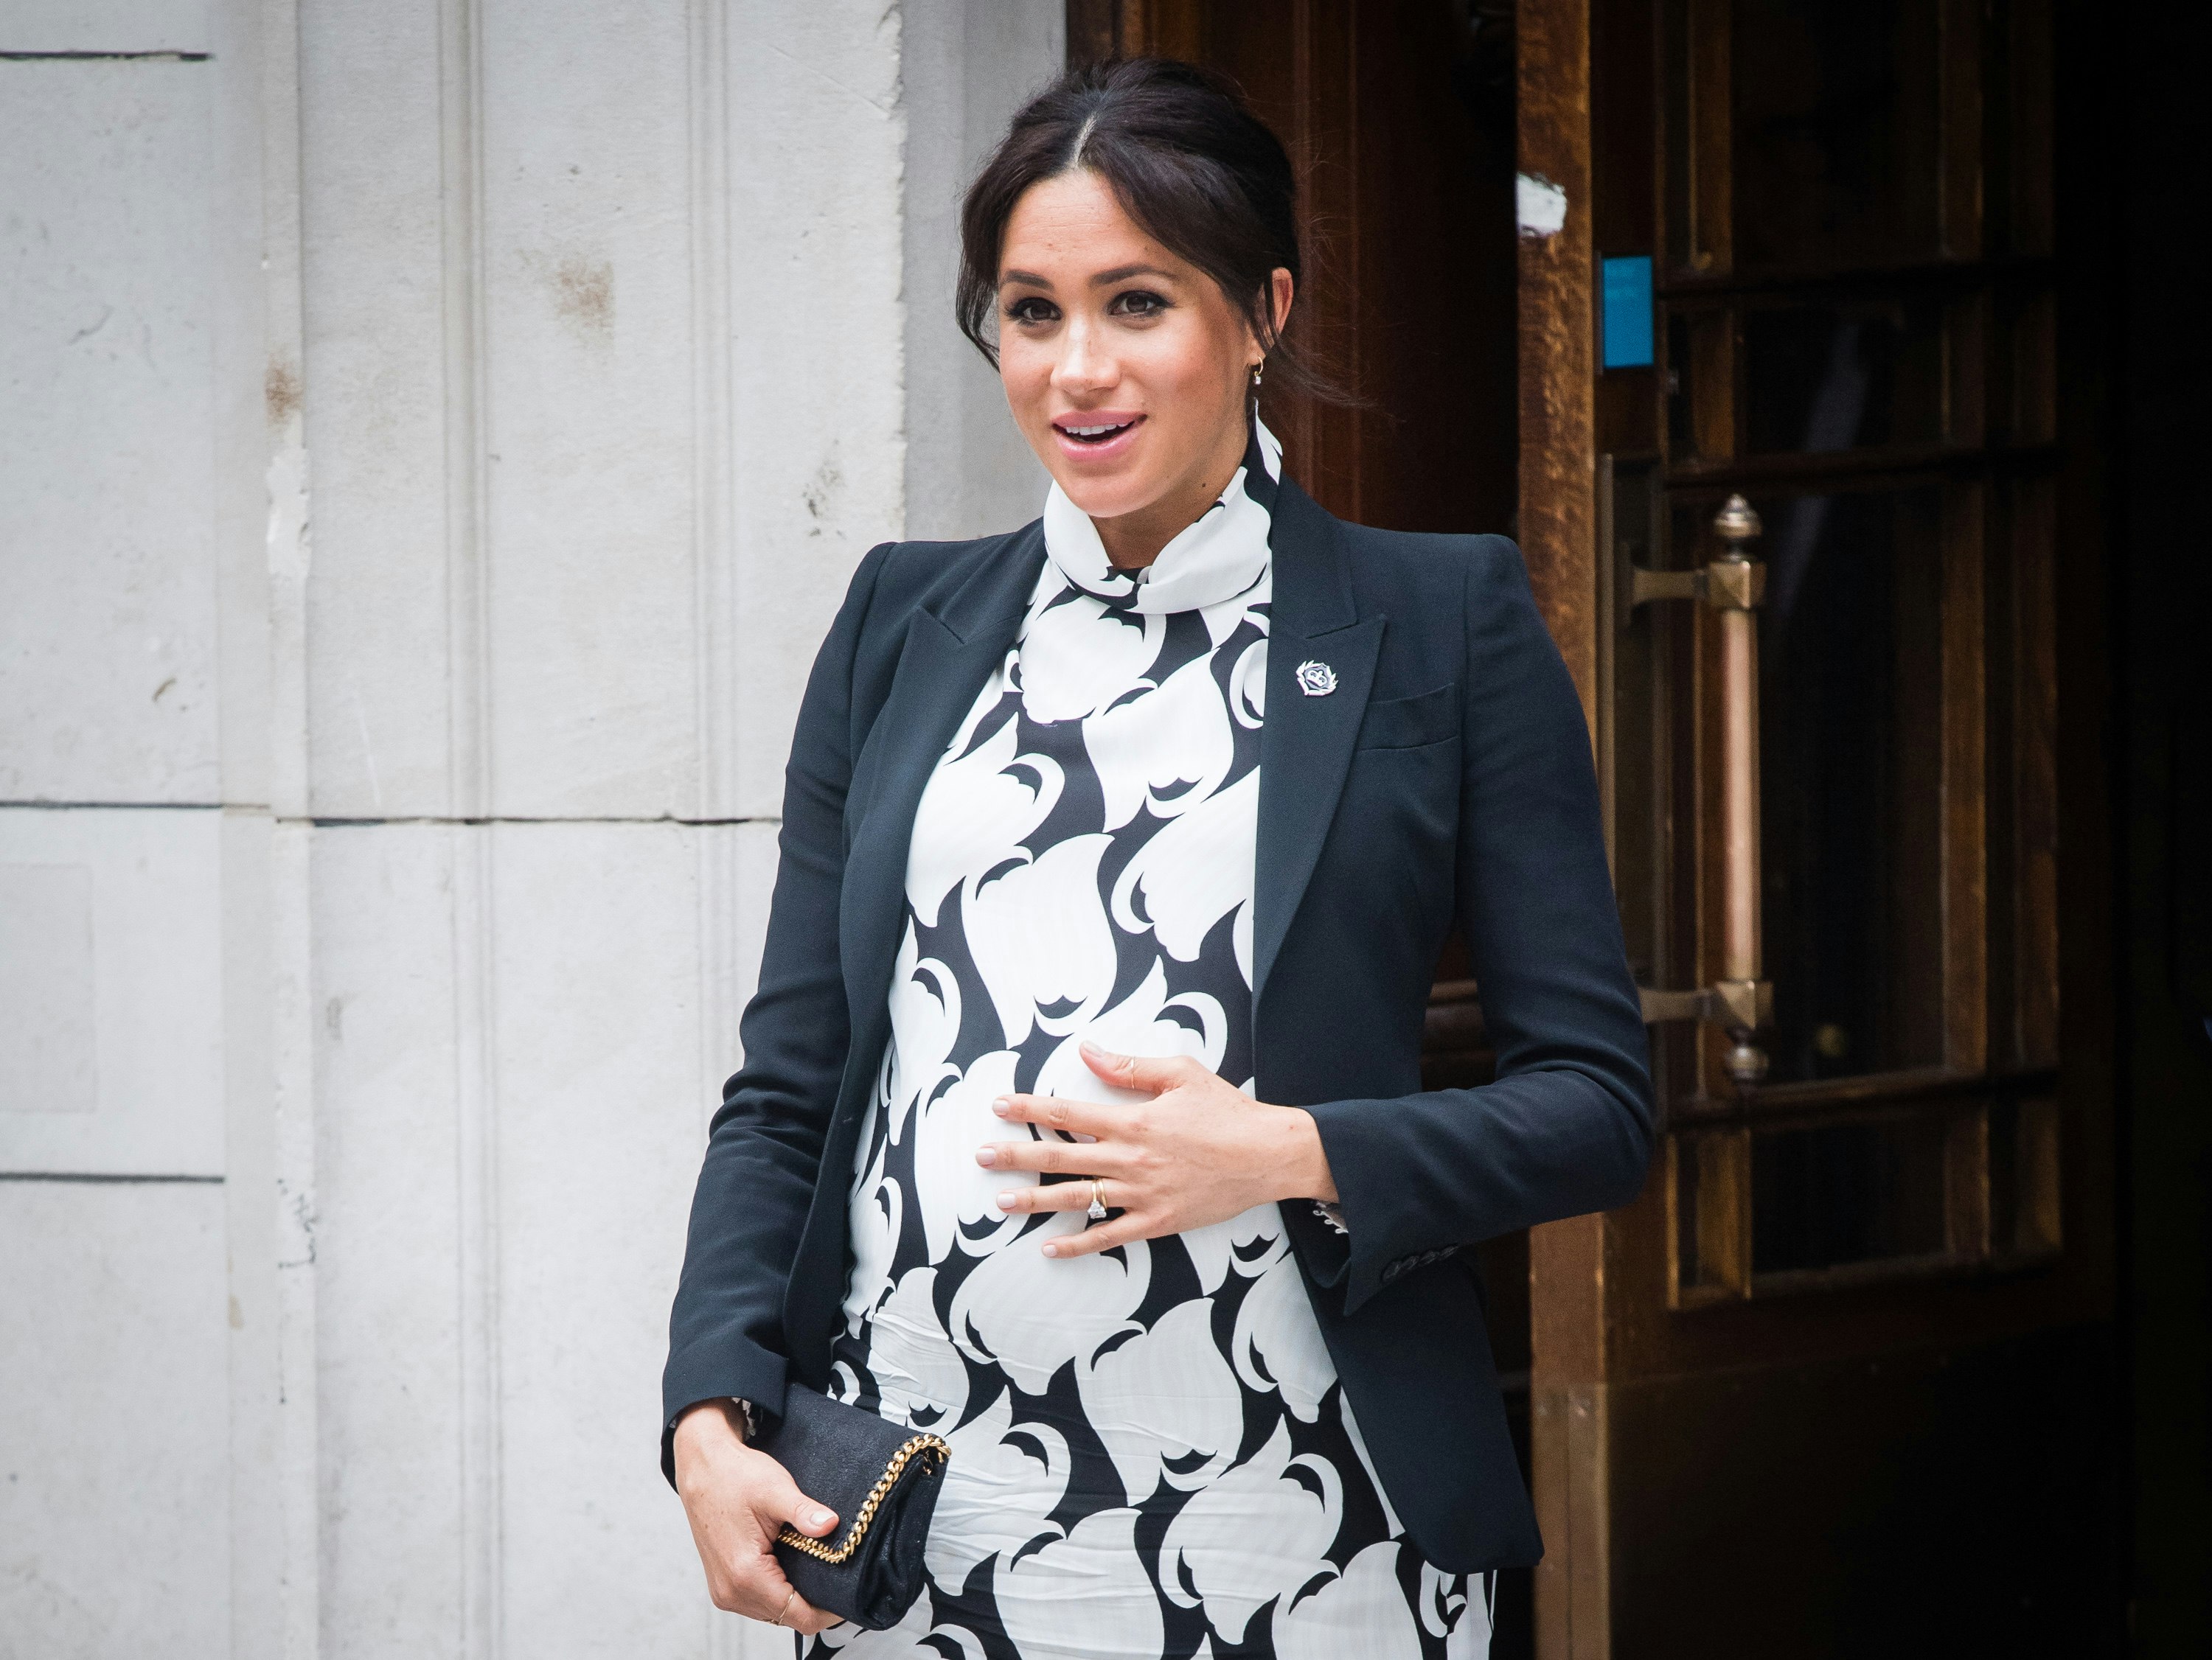 The Meghan Markle Fake Pregnancy Rumours Say More About Us Than Her